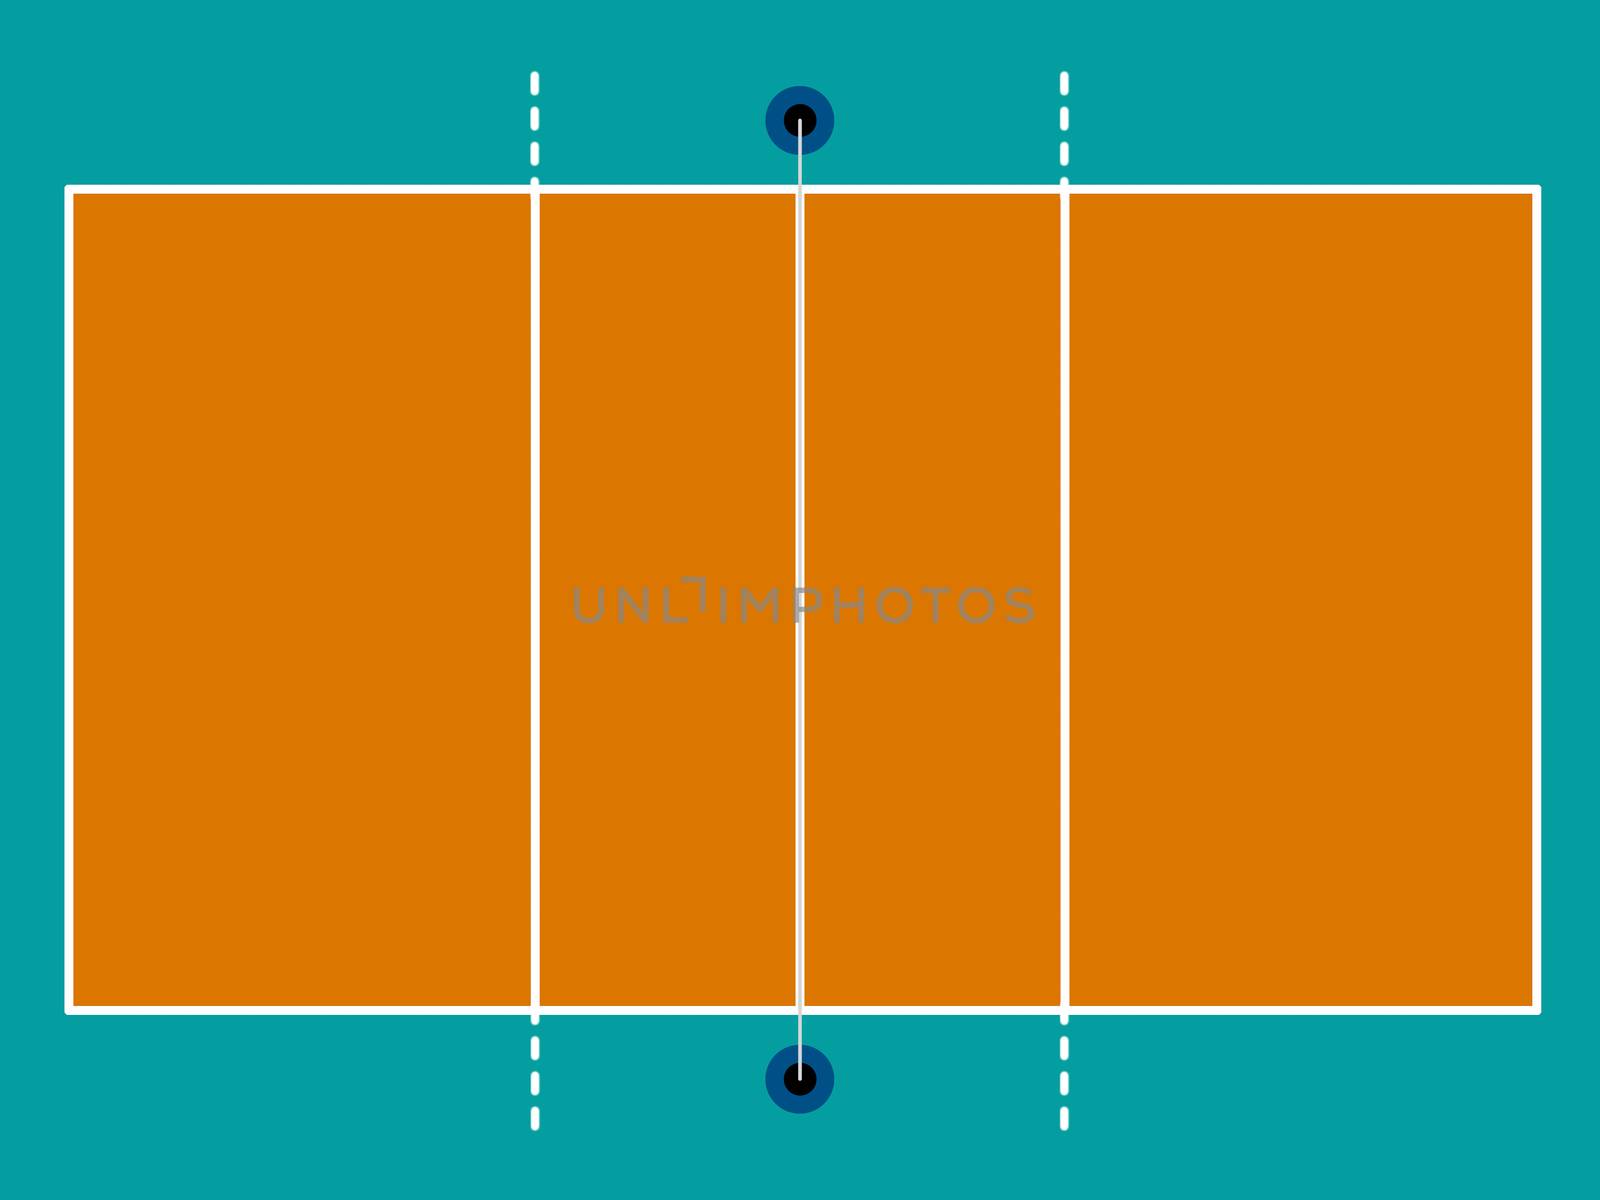 the image model of the volleyball field